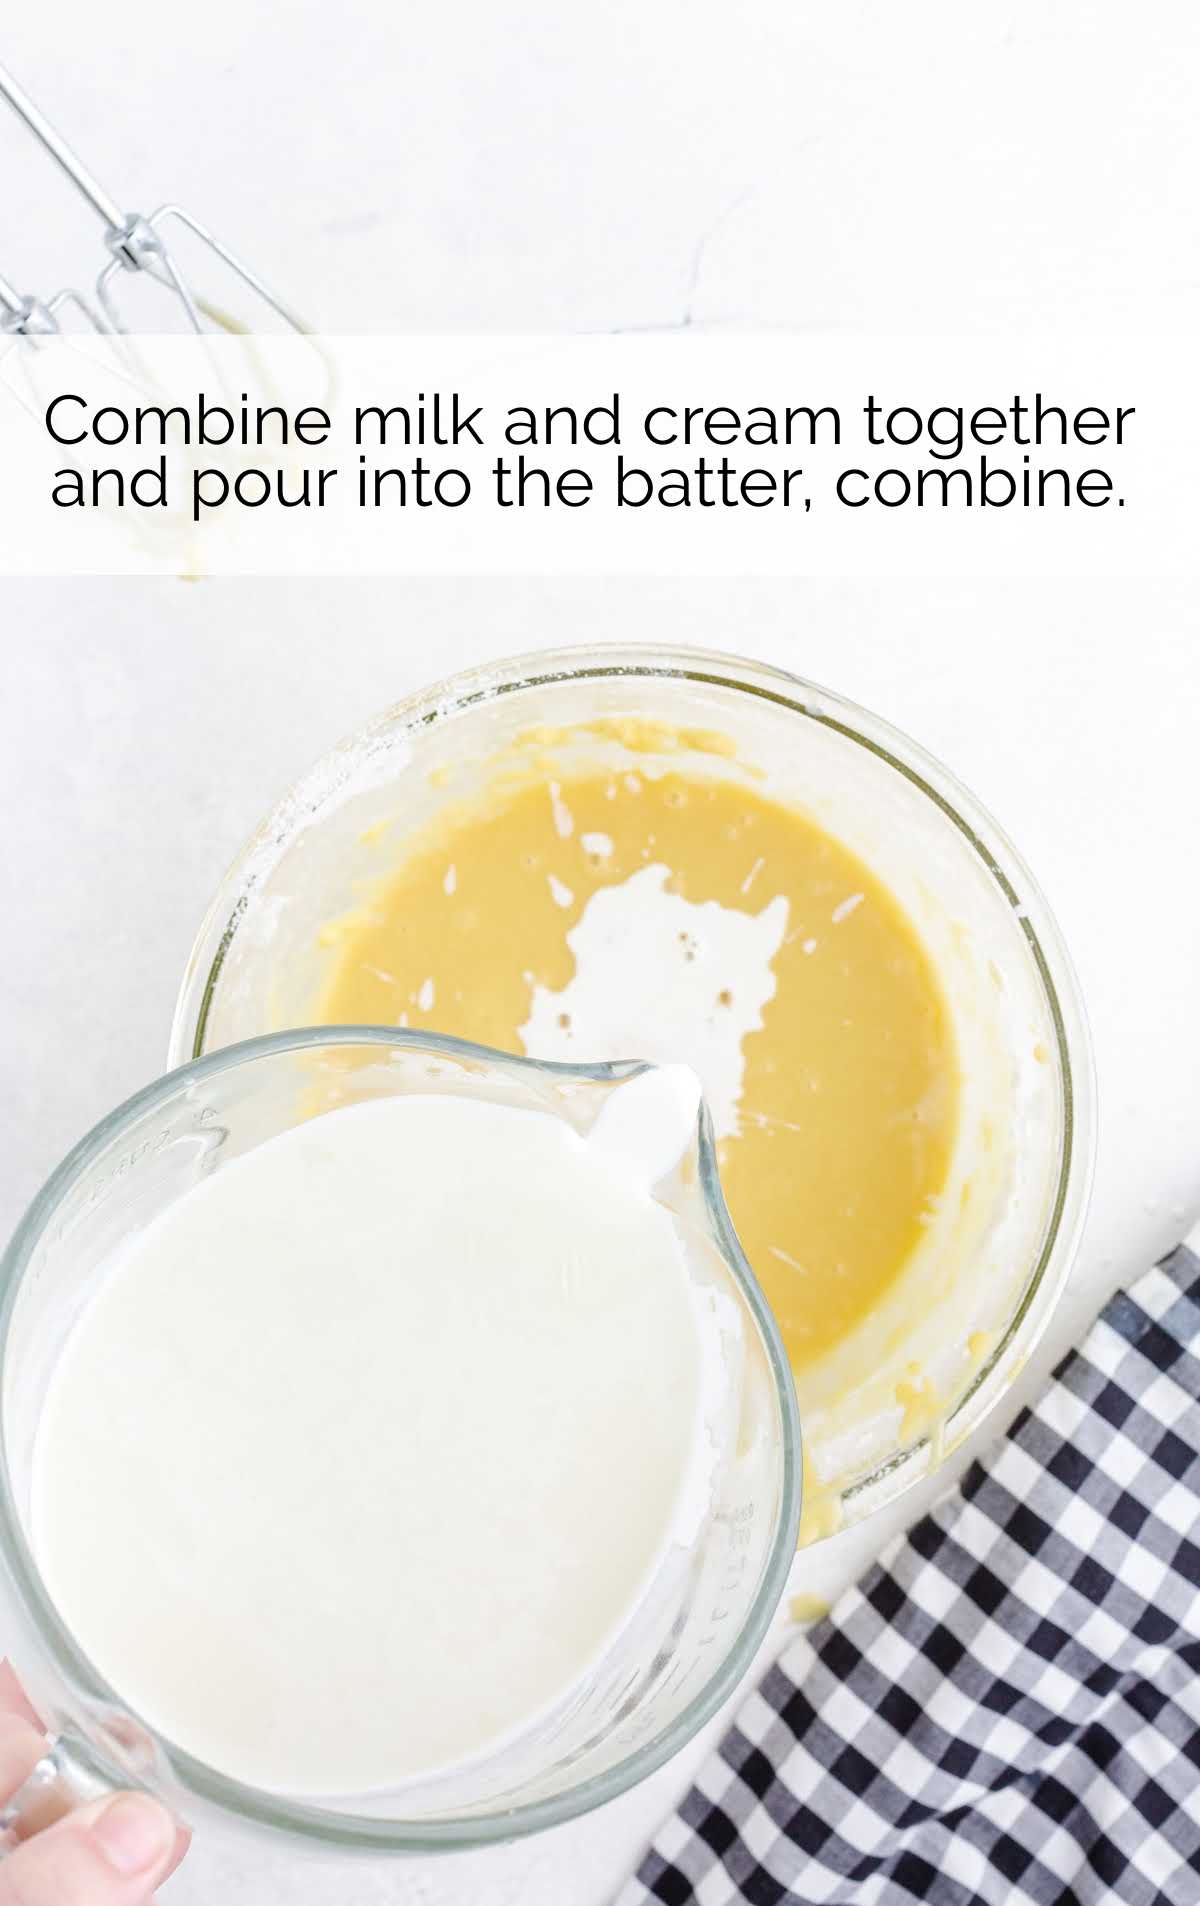 milk and cream combined together in a cup and then poured into the batter